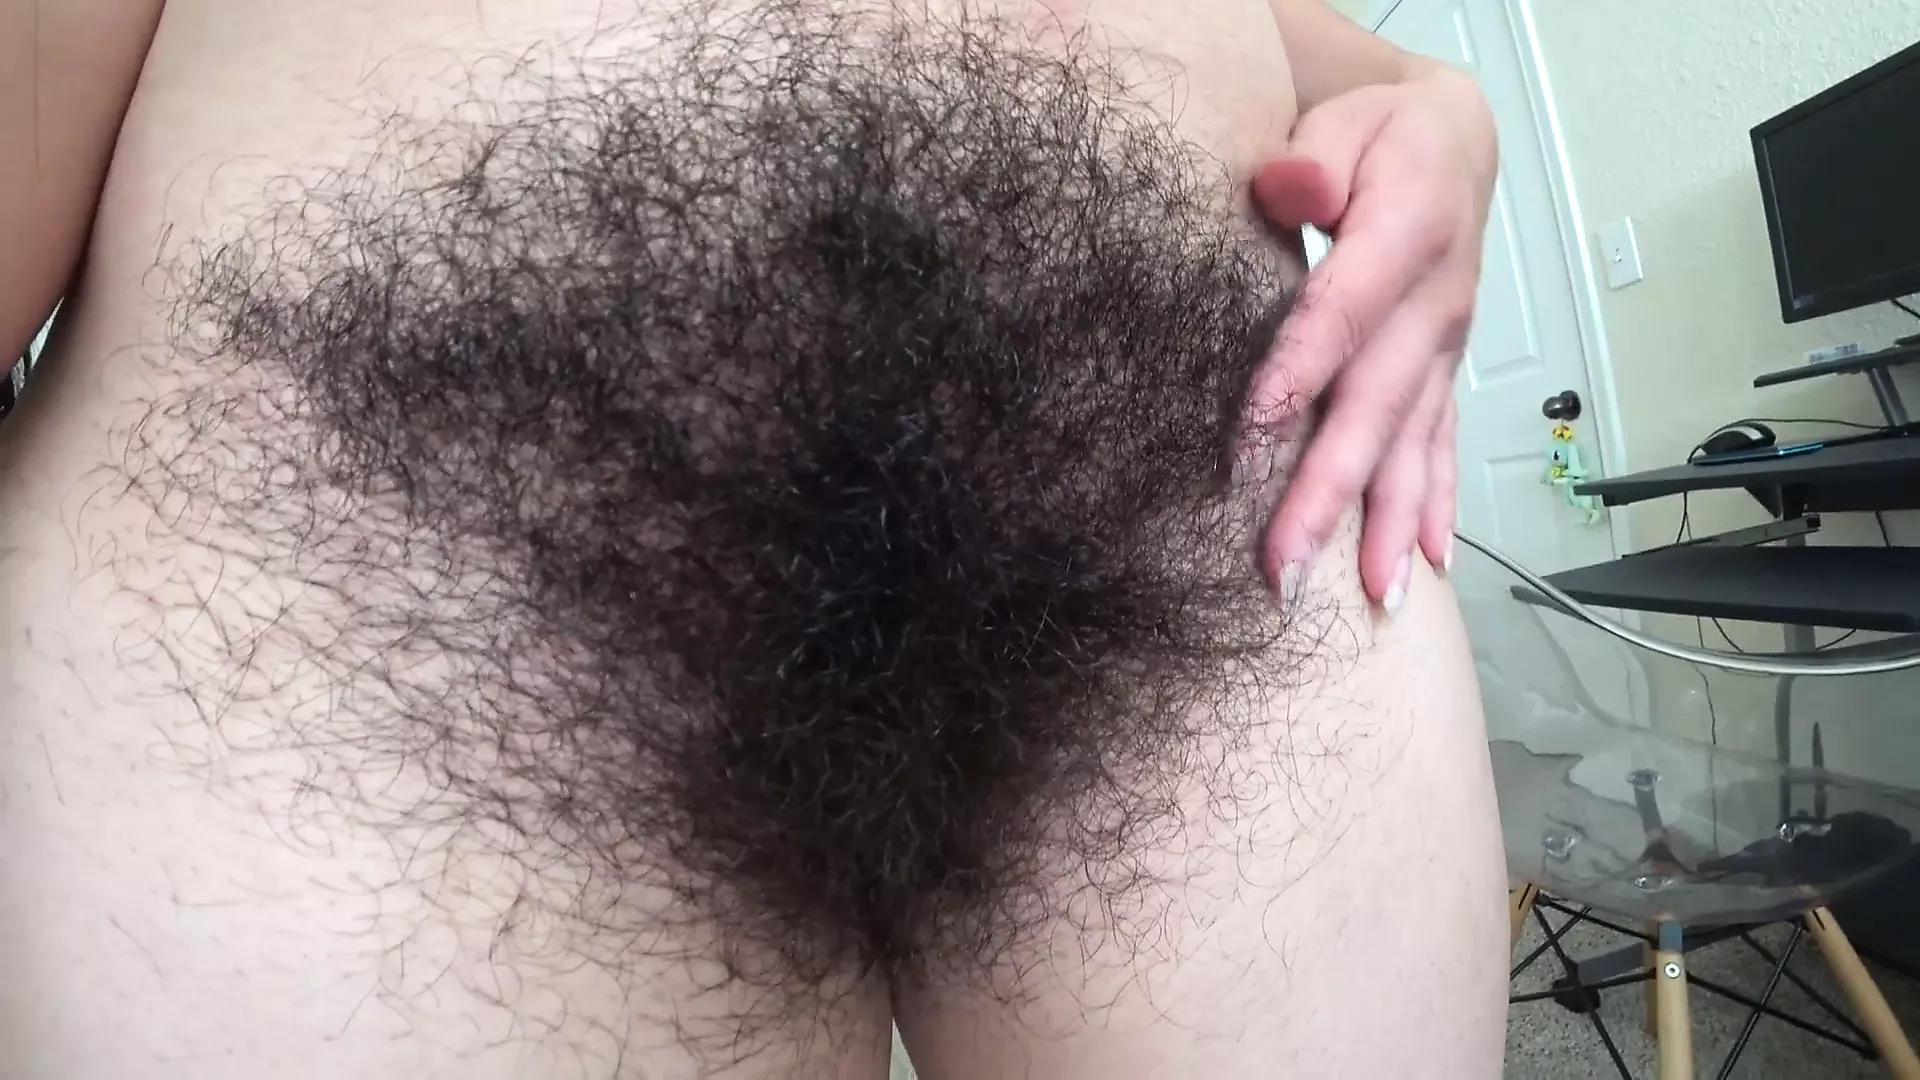 Extremely hairy girl pic